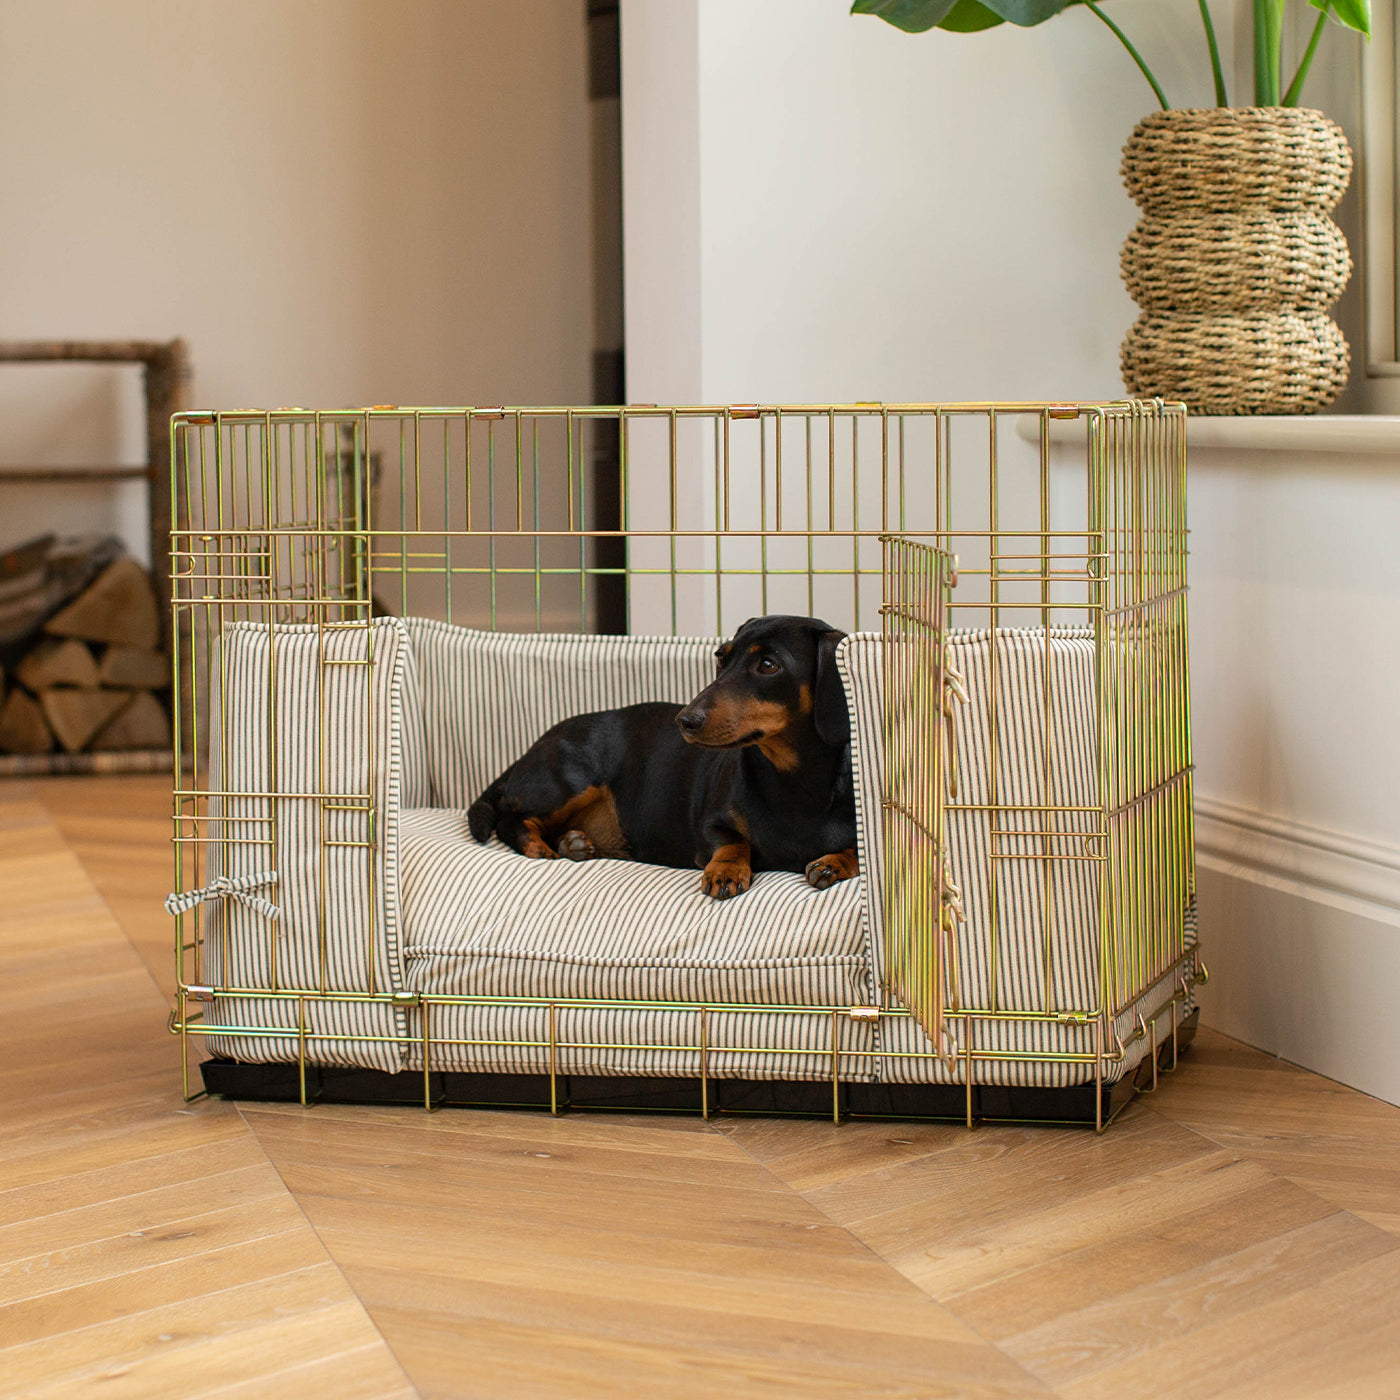 Discover our Luxury Heavy-Duty Gold Dog Cage Set With Cushion & Bumper, in Regency Stripe. The Perfect Dog Crate For The Ultimate Naptime, Available Now at Lords & Labradors US